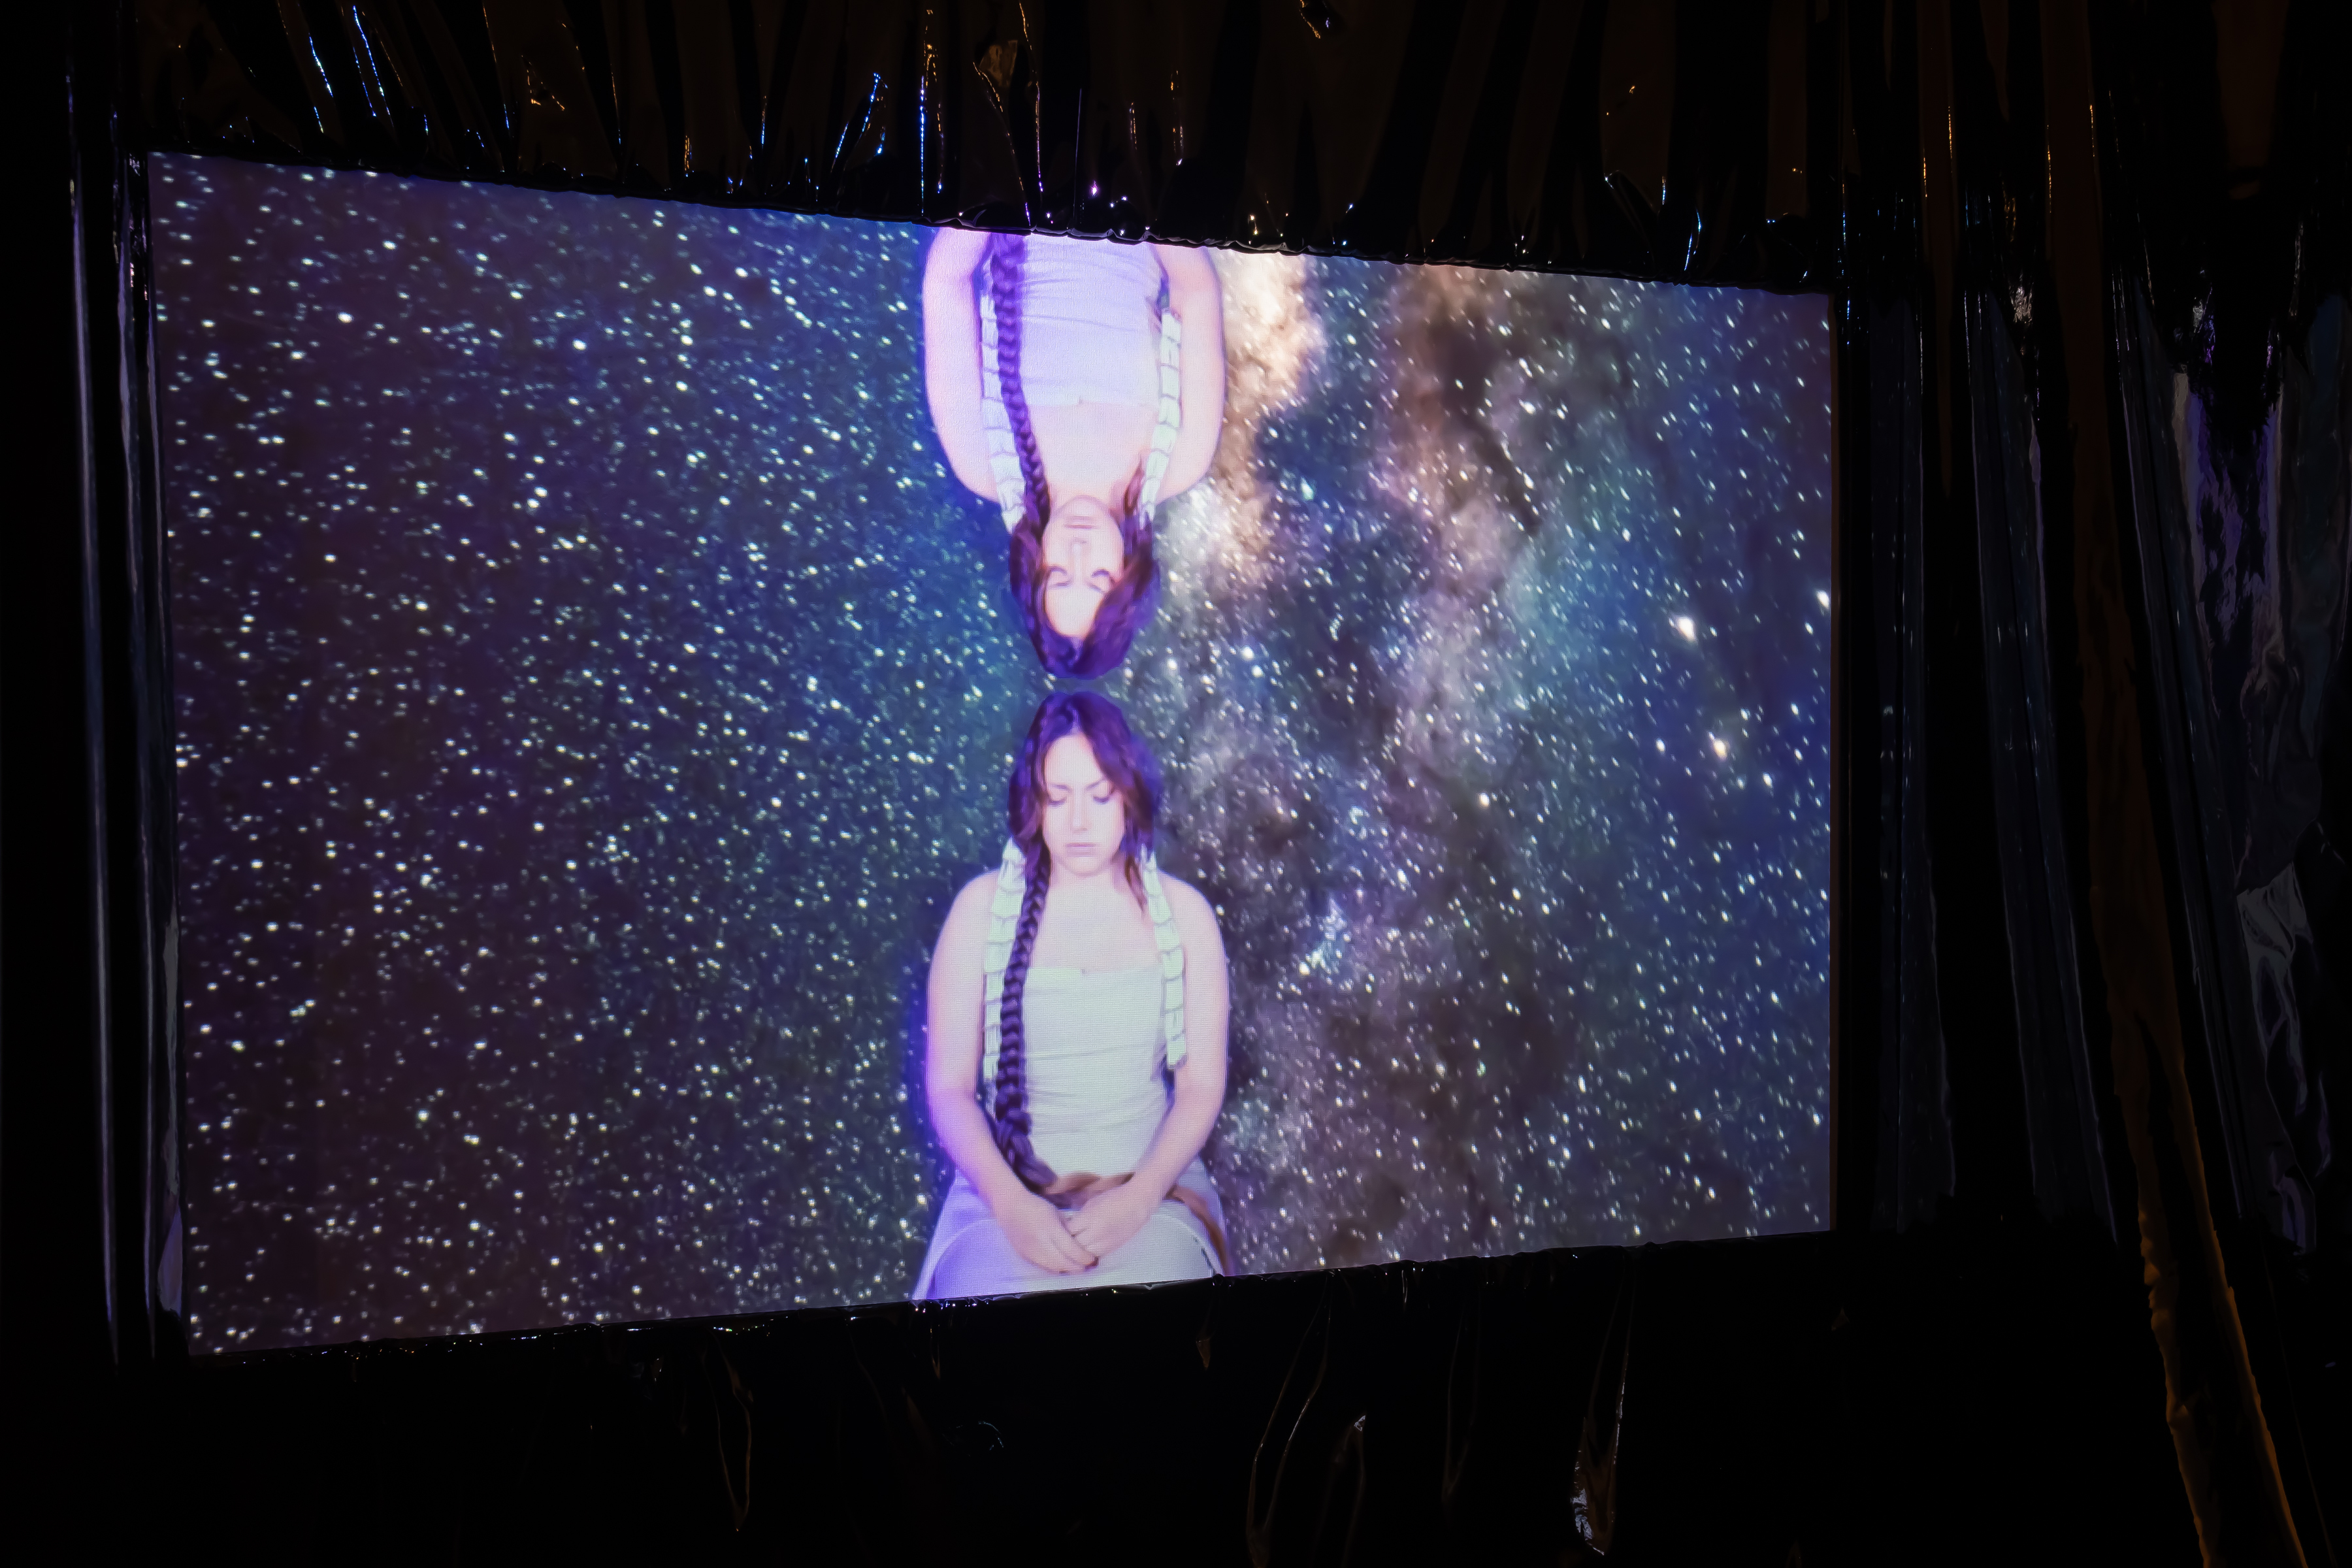 On a screen against a black wall, a person with long braided dark hair sits upright against a backdrop of constellations. A reflected image of this person is right above them.